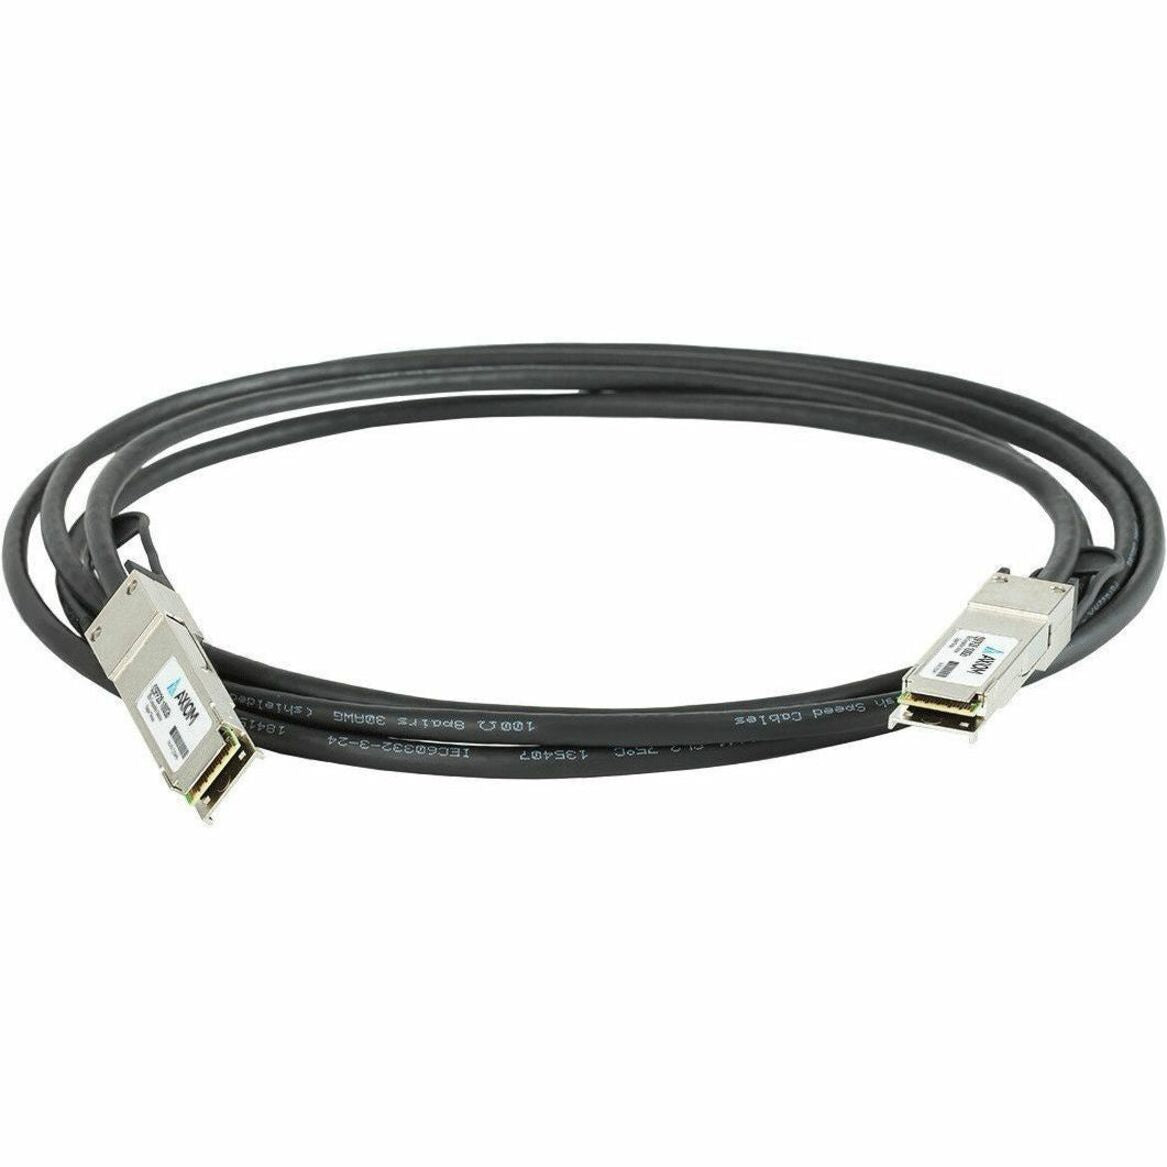 Axiom Q28P-100G-C1M-AX 100GBASE-CR4 QSFP28 Passive DAC Cable 1m, High-Speed Network Cable for OEM Modules, Switches, Routers, and Network Devices